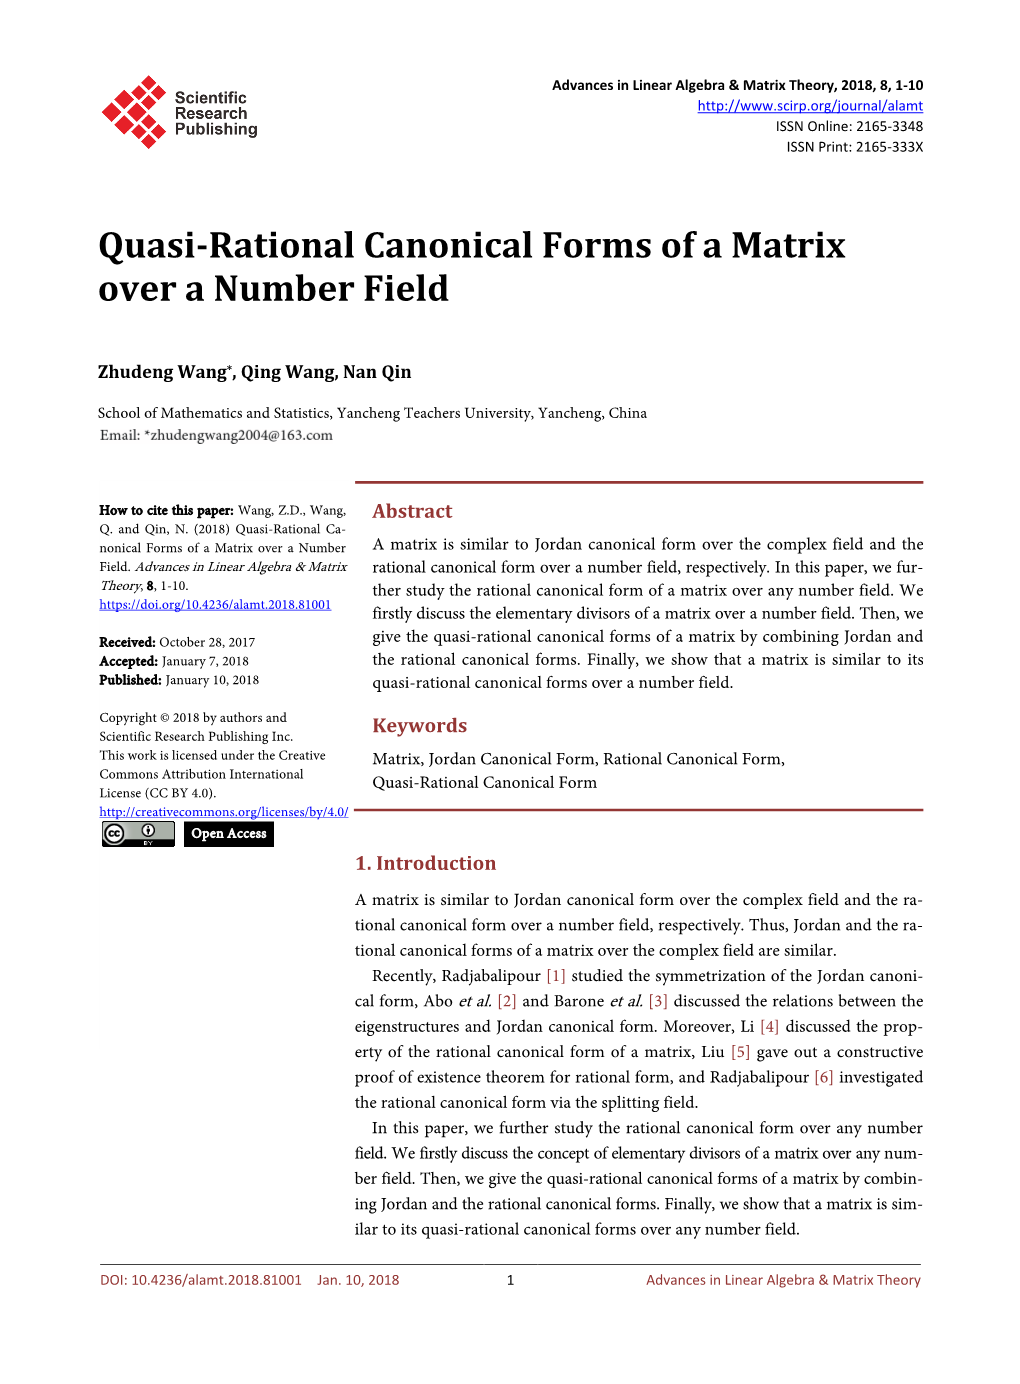 Quasi-Rational Canonical Forms of a Matrix Over a Number Field